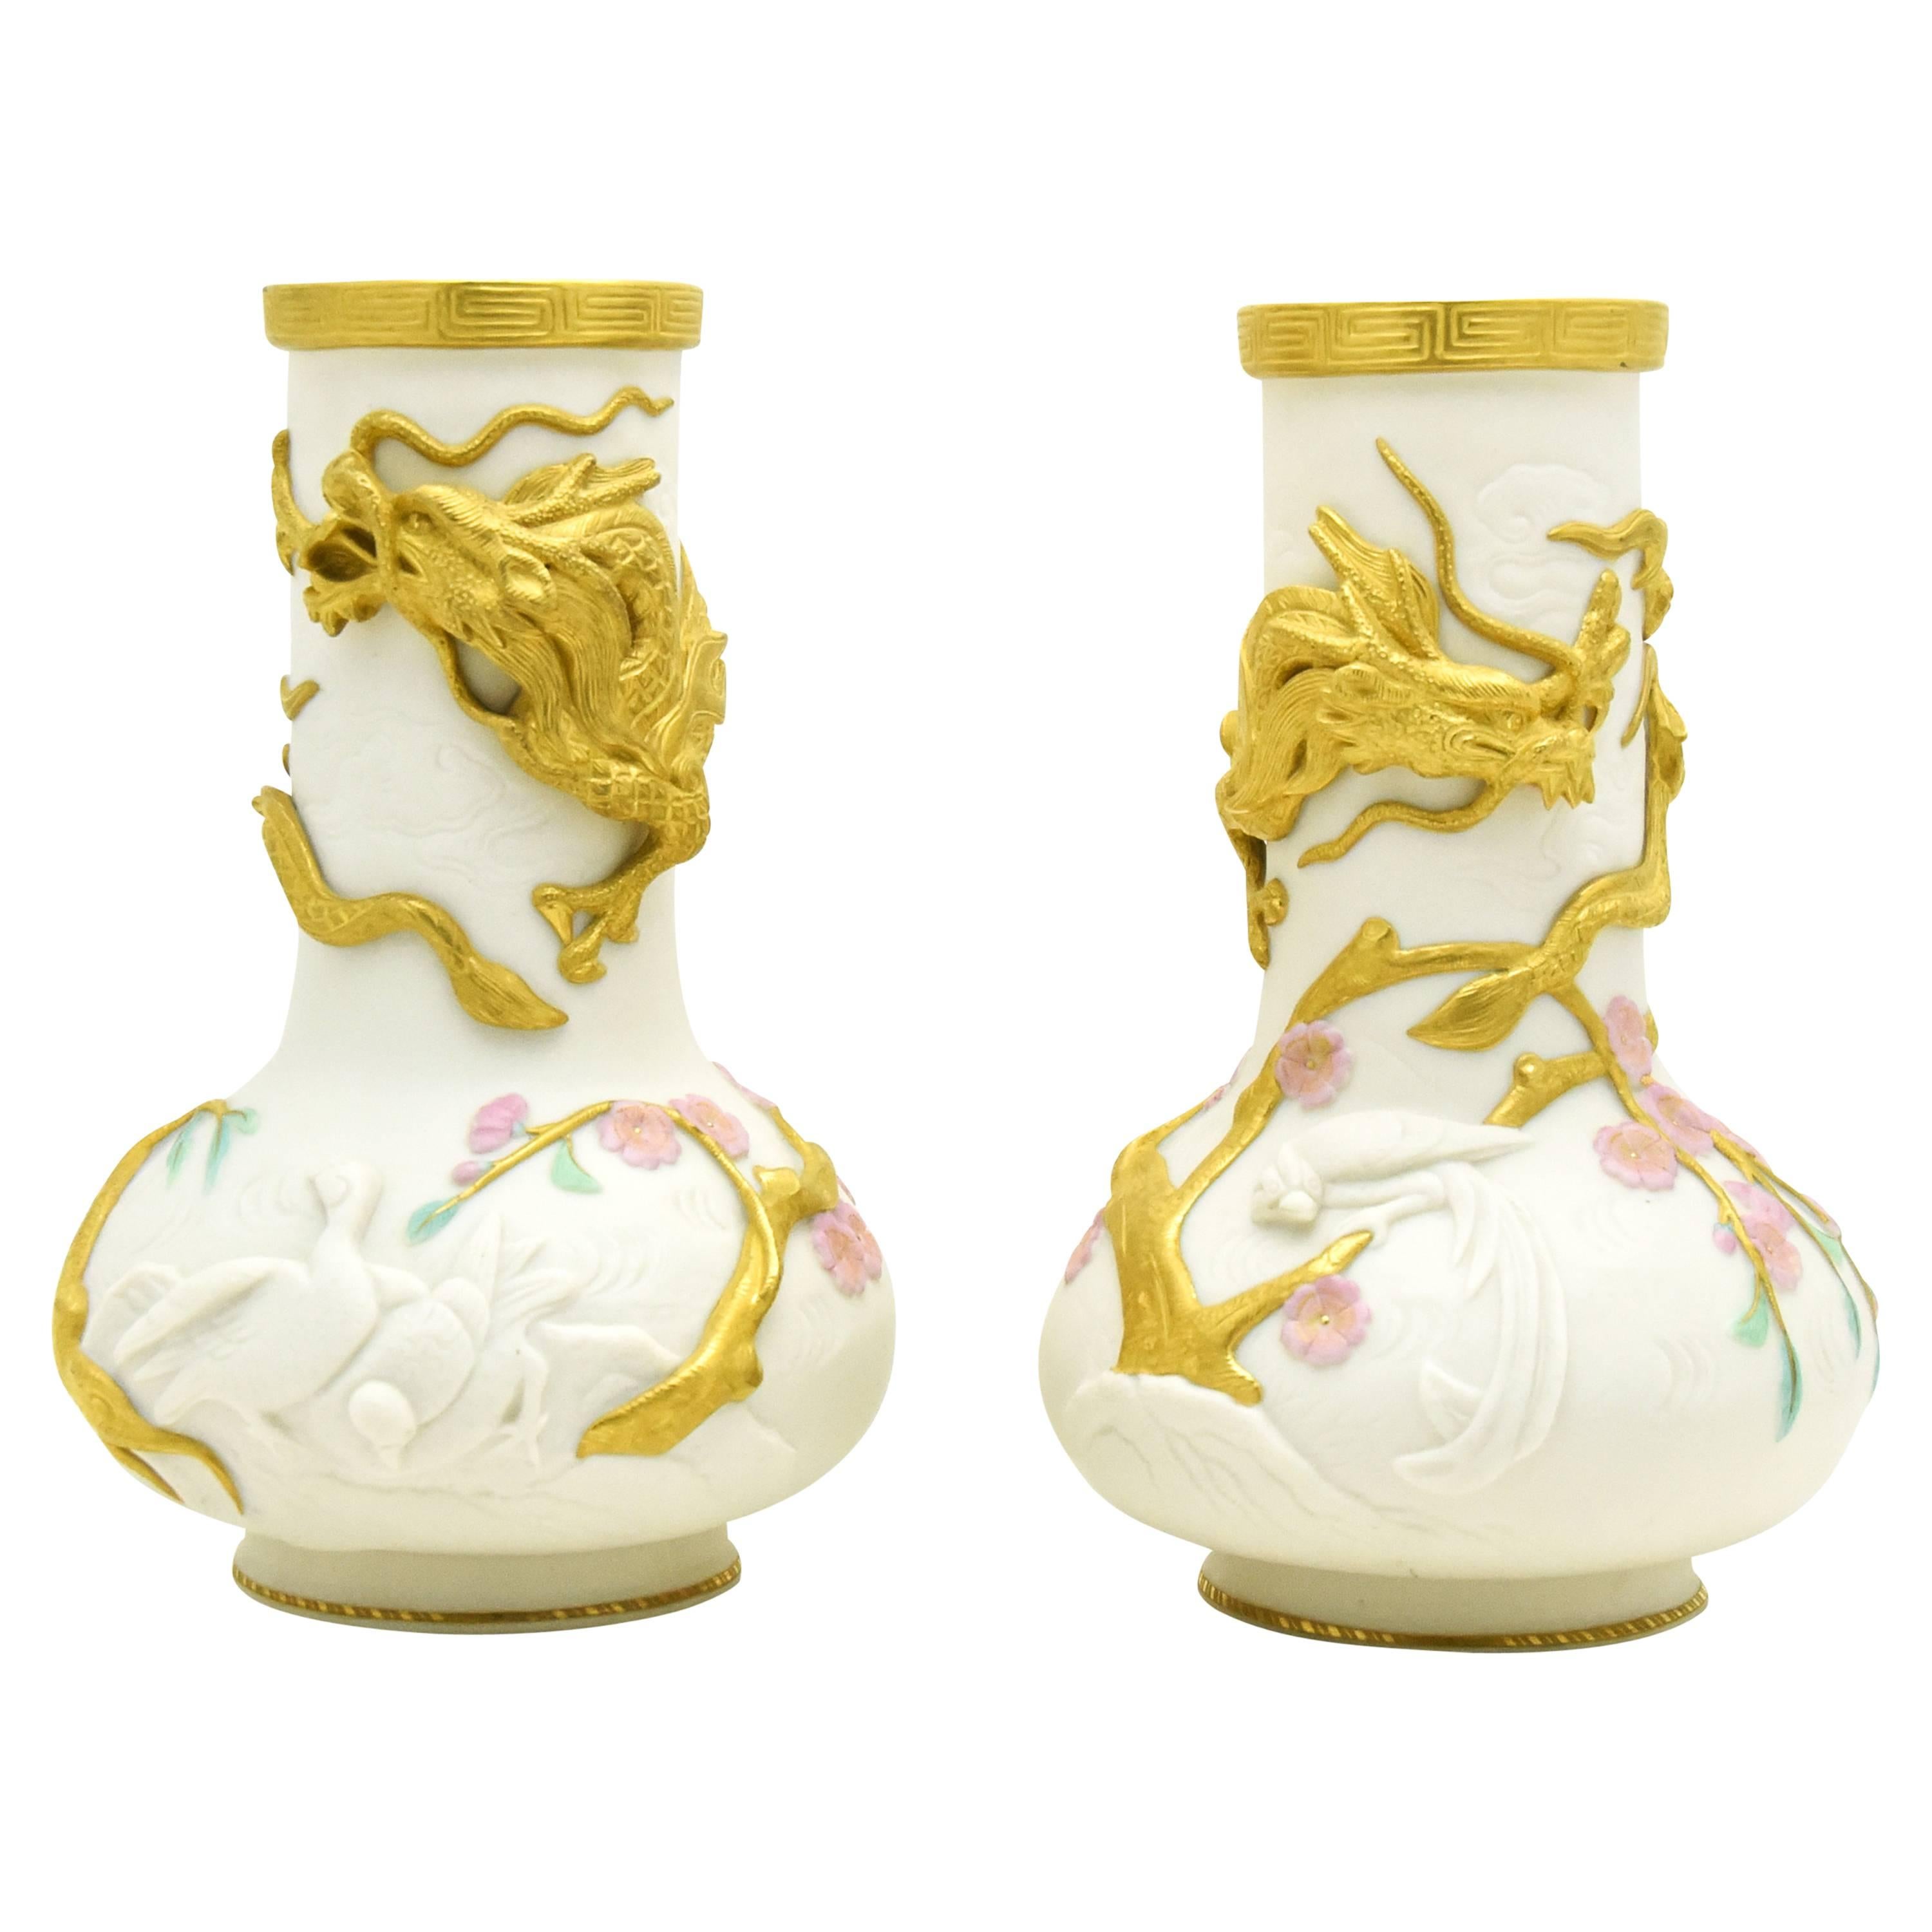 Pair of Copeland Japonesque Vases with Gold Dragons, Birds & Cherry Blossoms